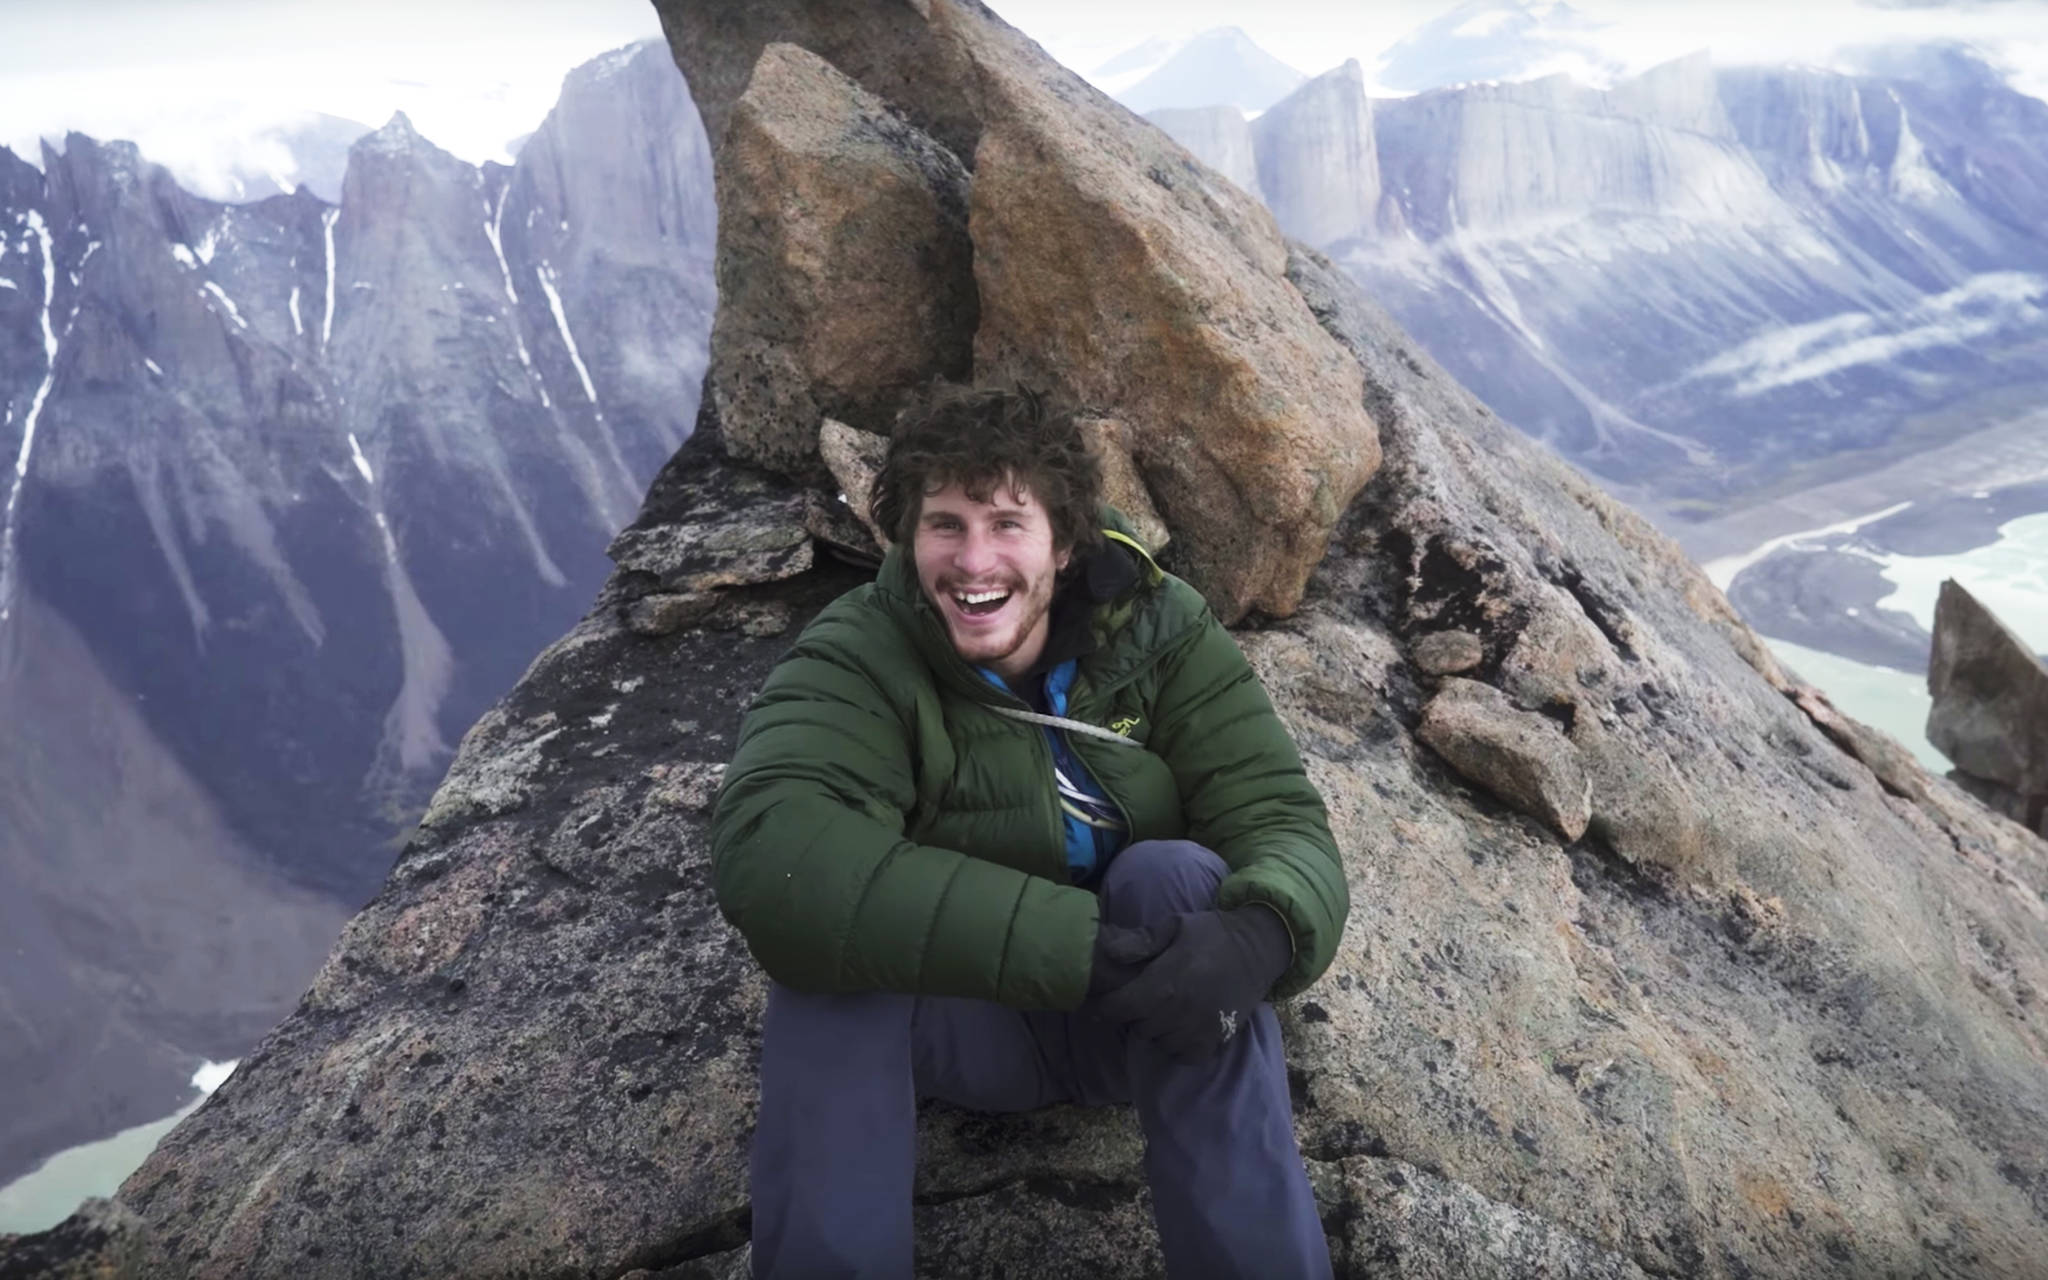 British Columbia climber Marc-Andre Leclerc, 25, is pictured on a climb. (Courtesy photo | ARCTERYX)